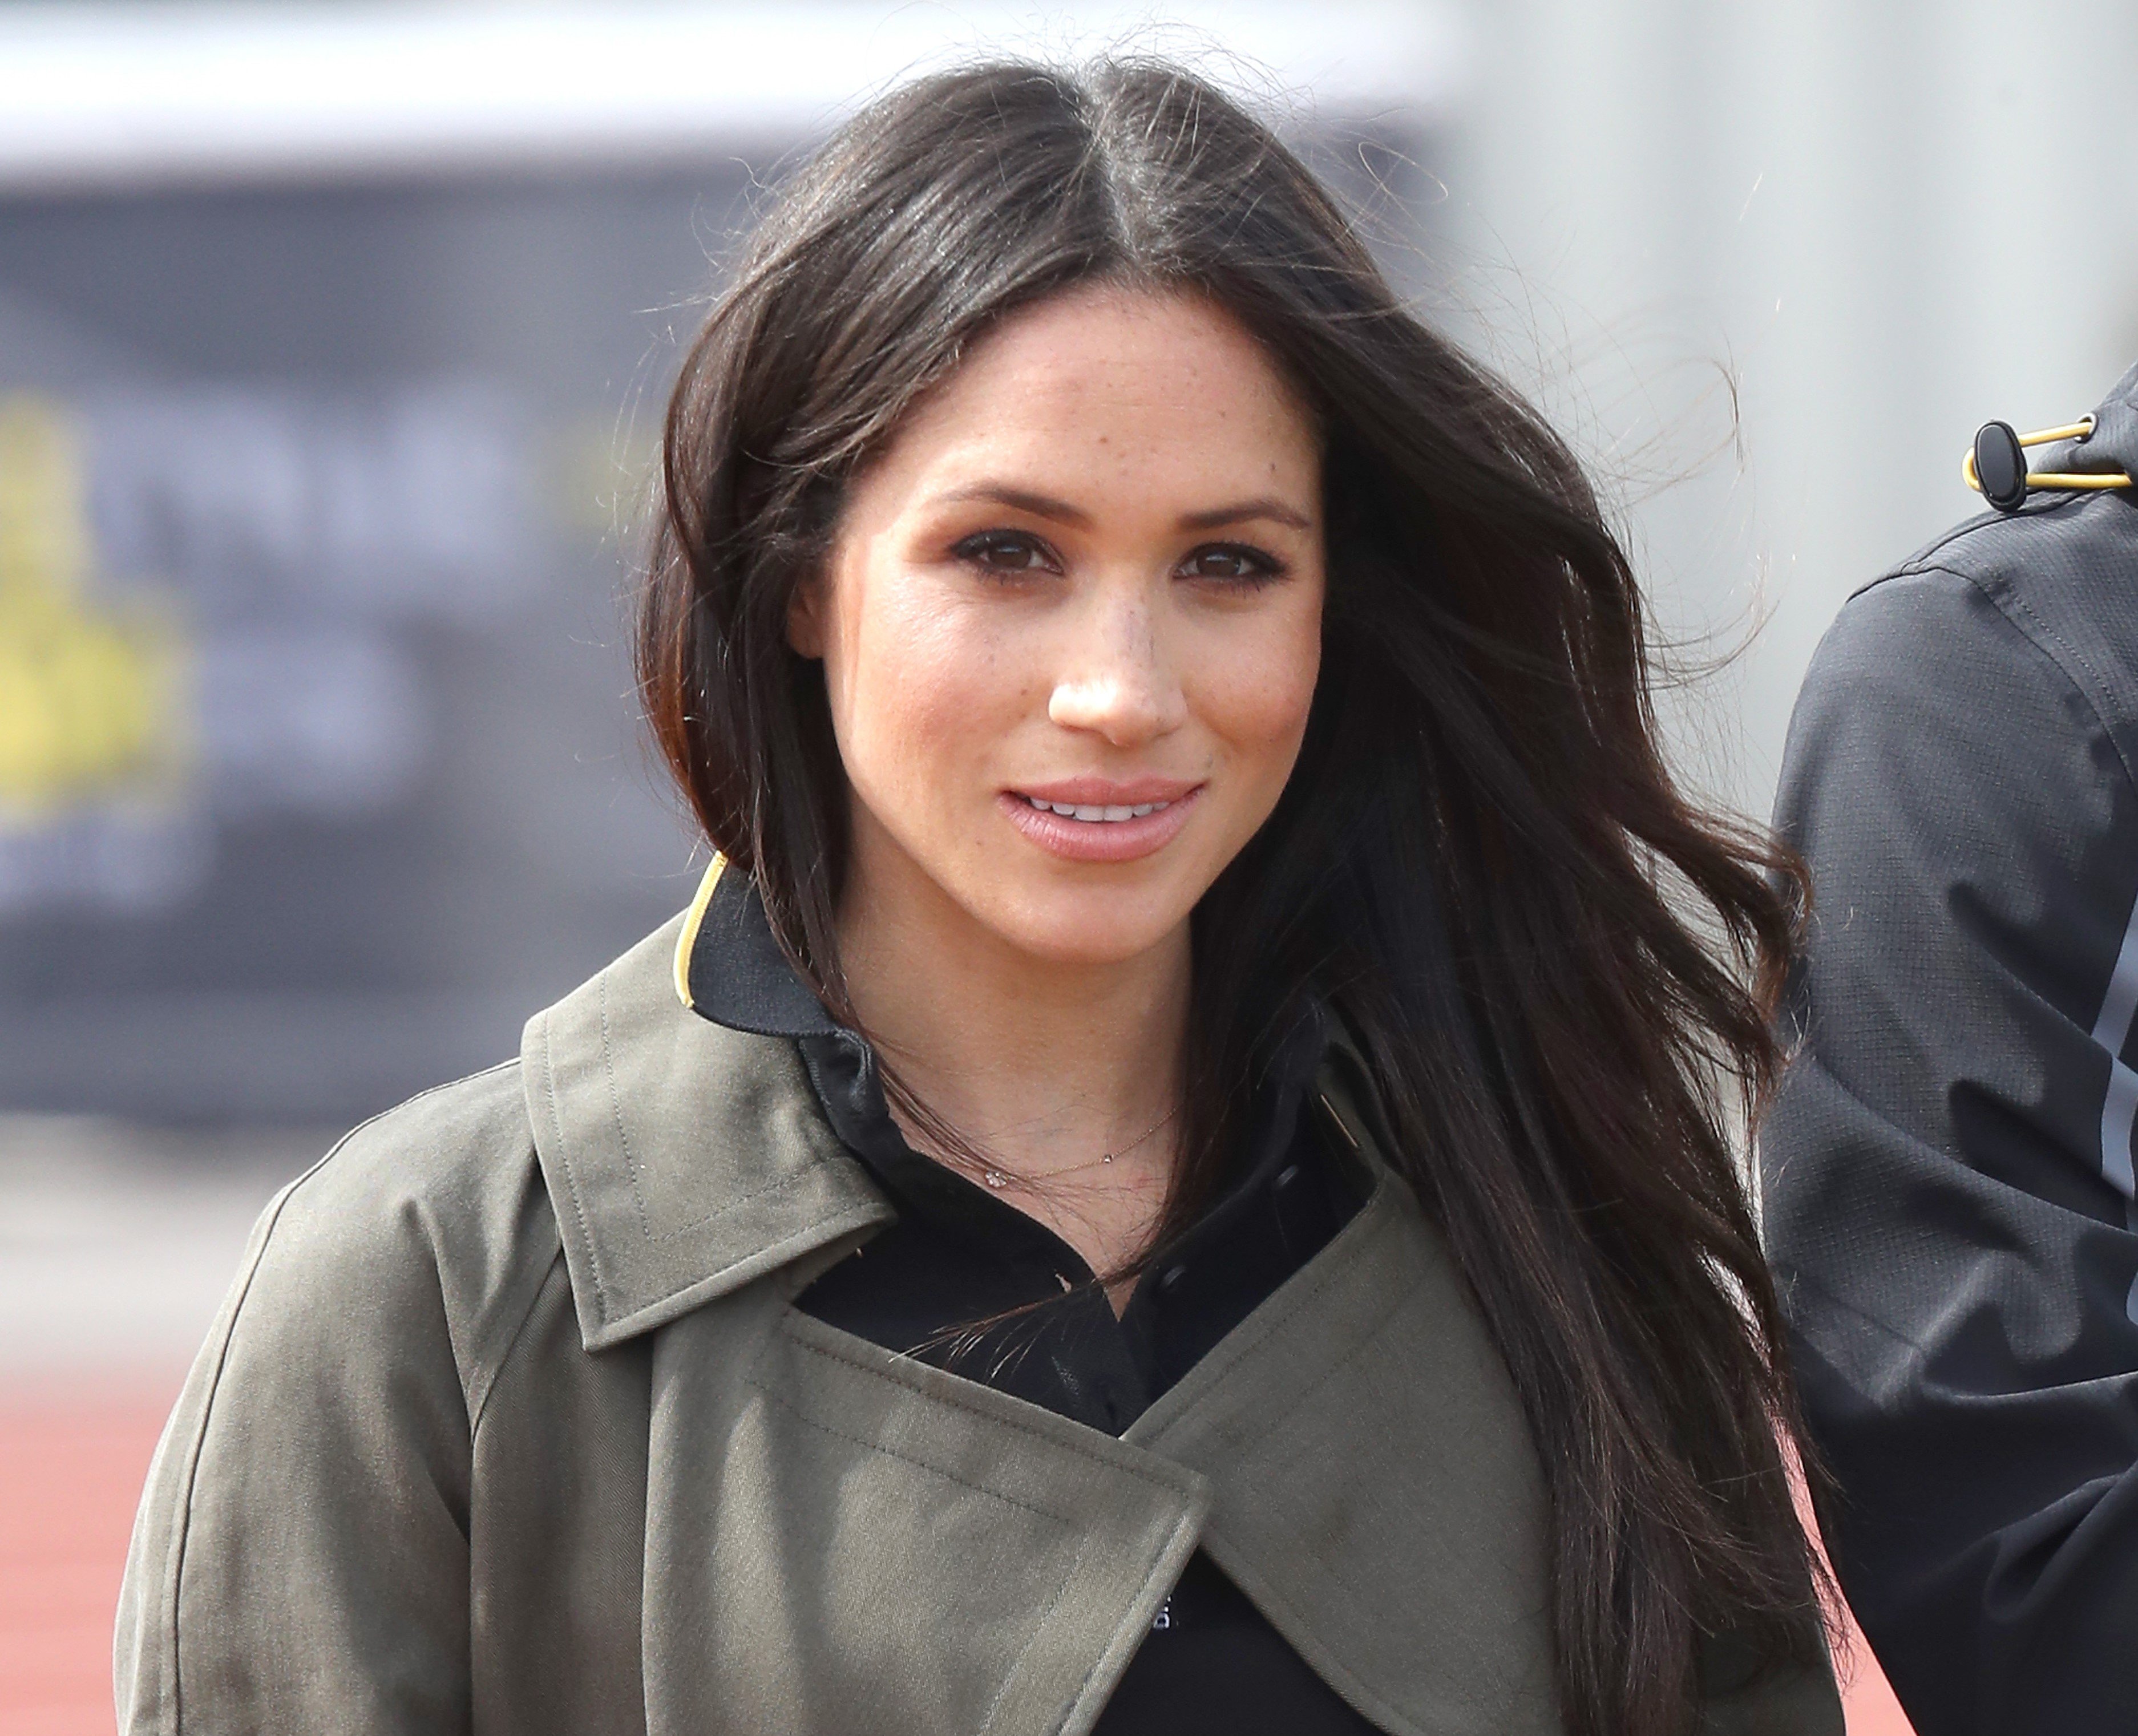 Meghan Markle photographed at the 2018 U.K. Team Trials for the Invictus Games Sydney